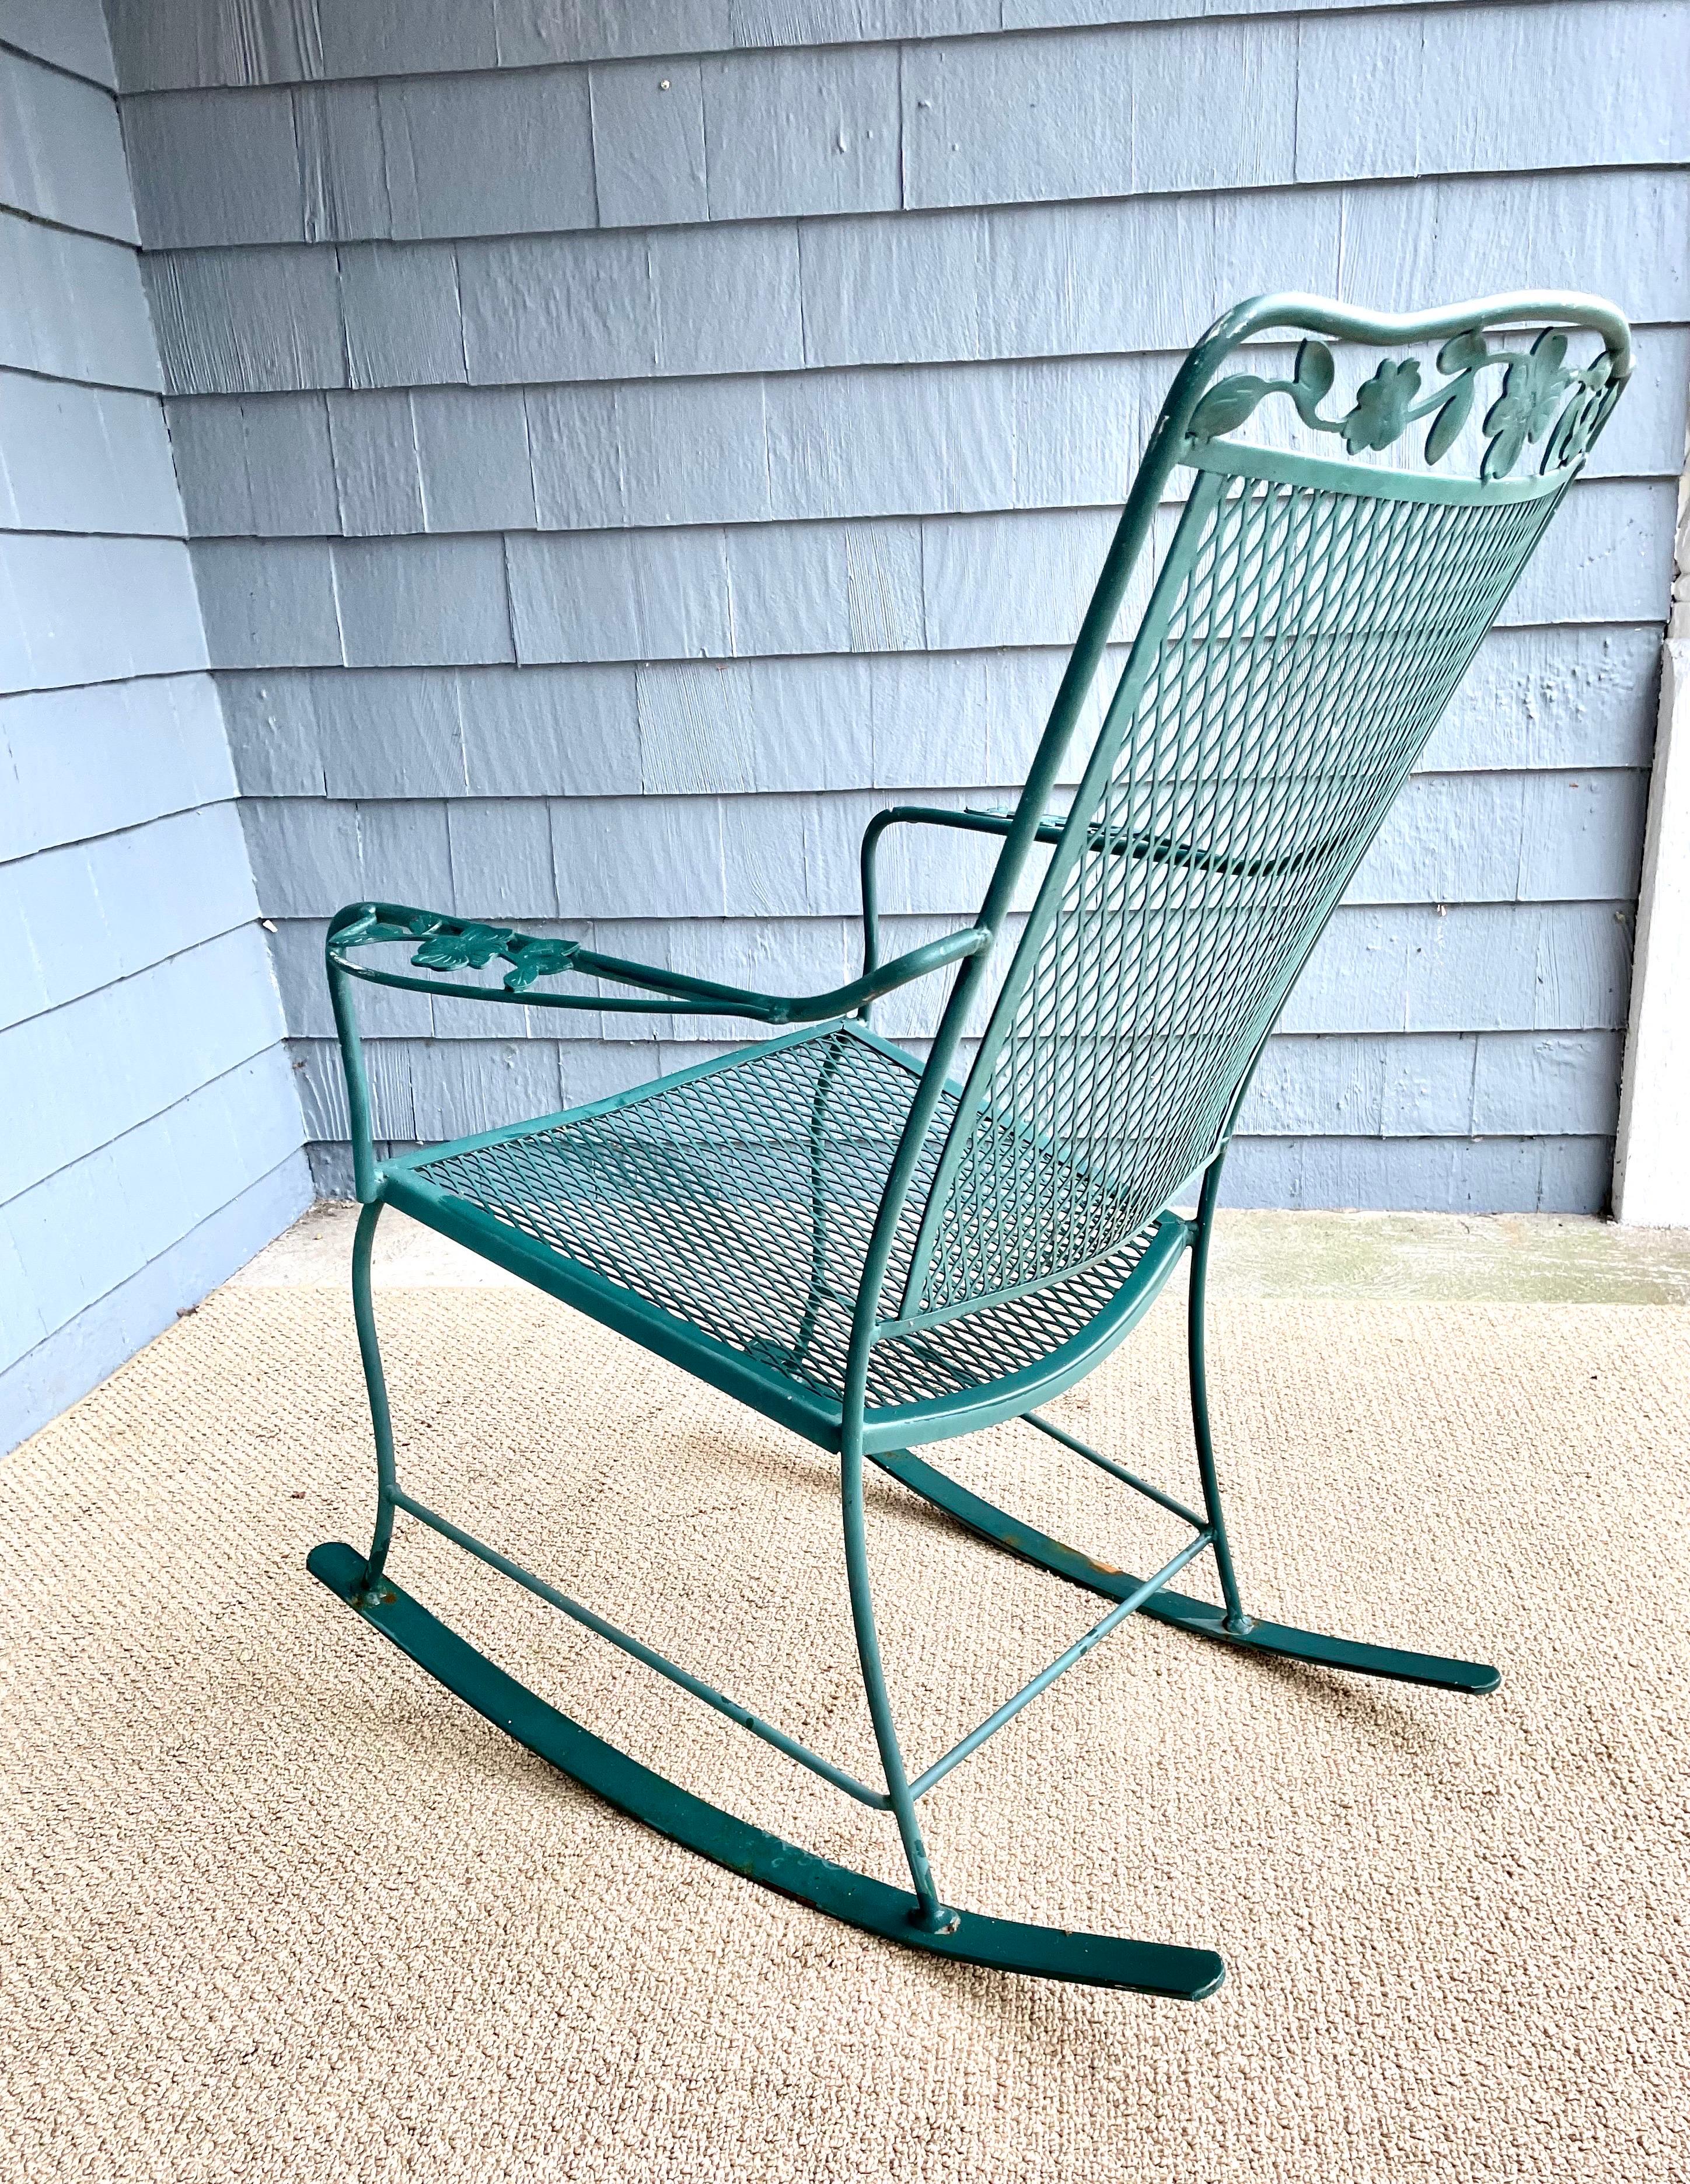 Wrought Iron Outdoor Patio Rocker Arm Chair In Good Condition For Sale In Cumberland, RI